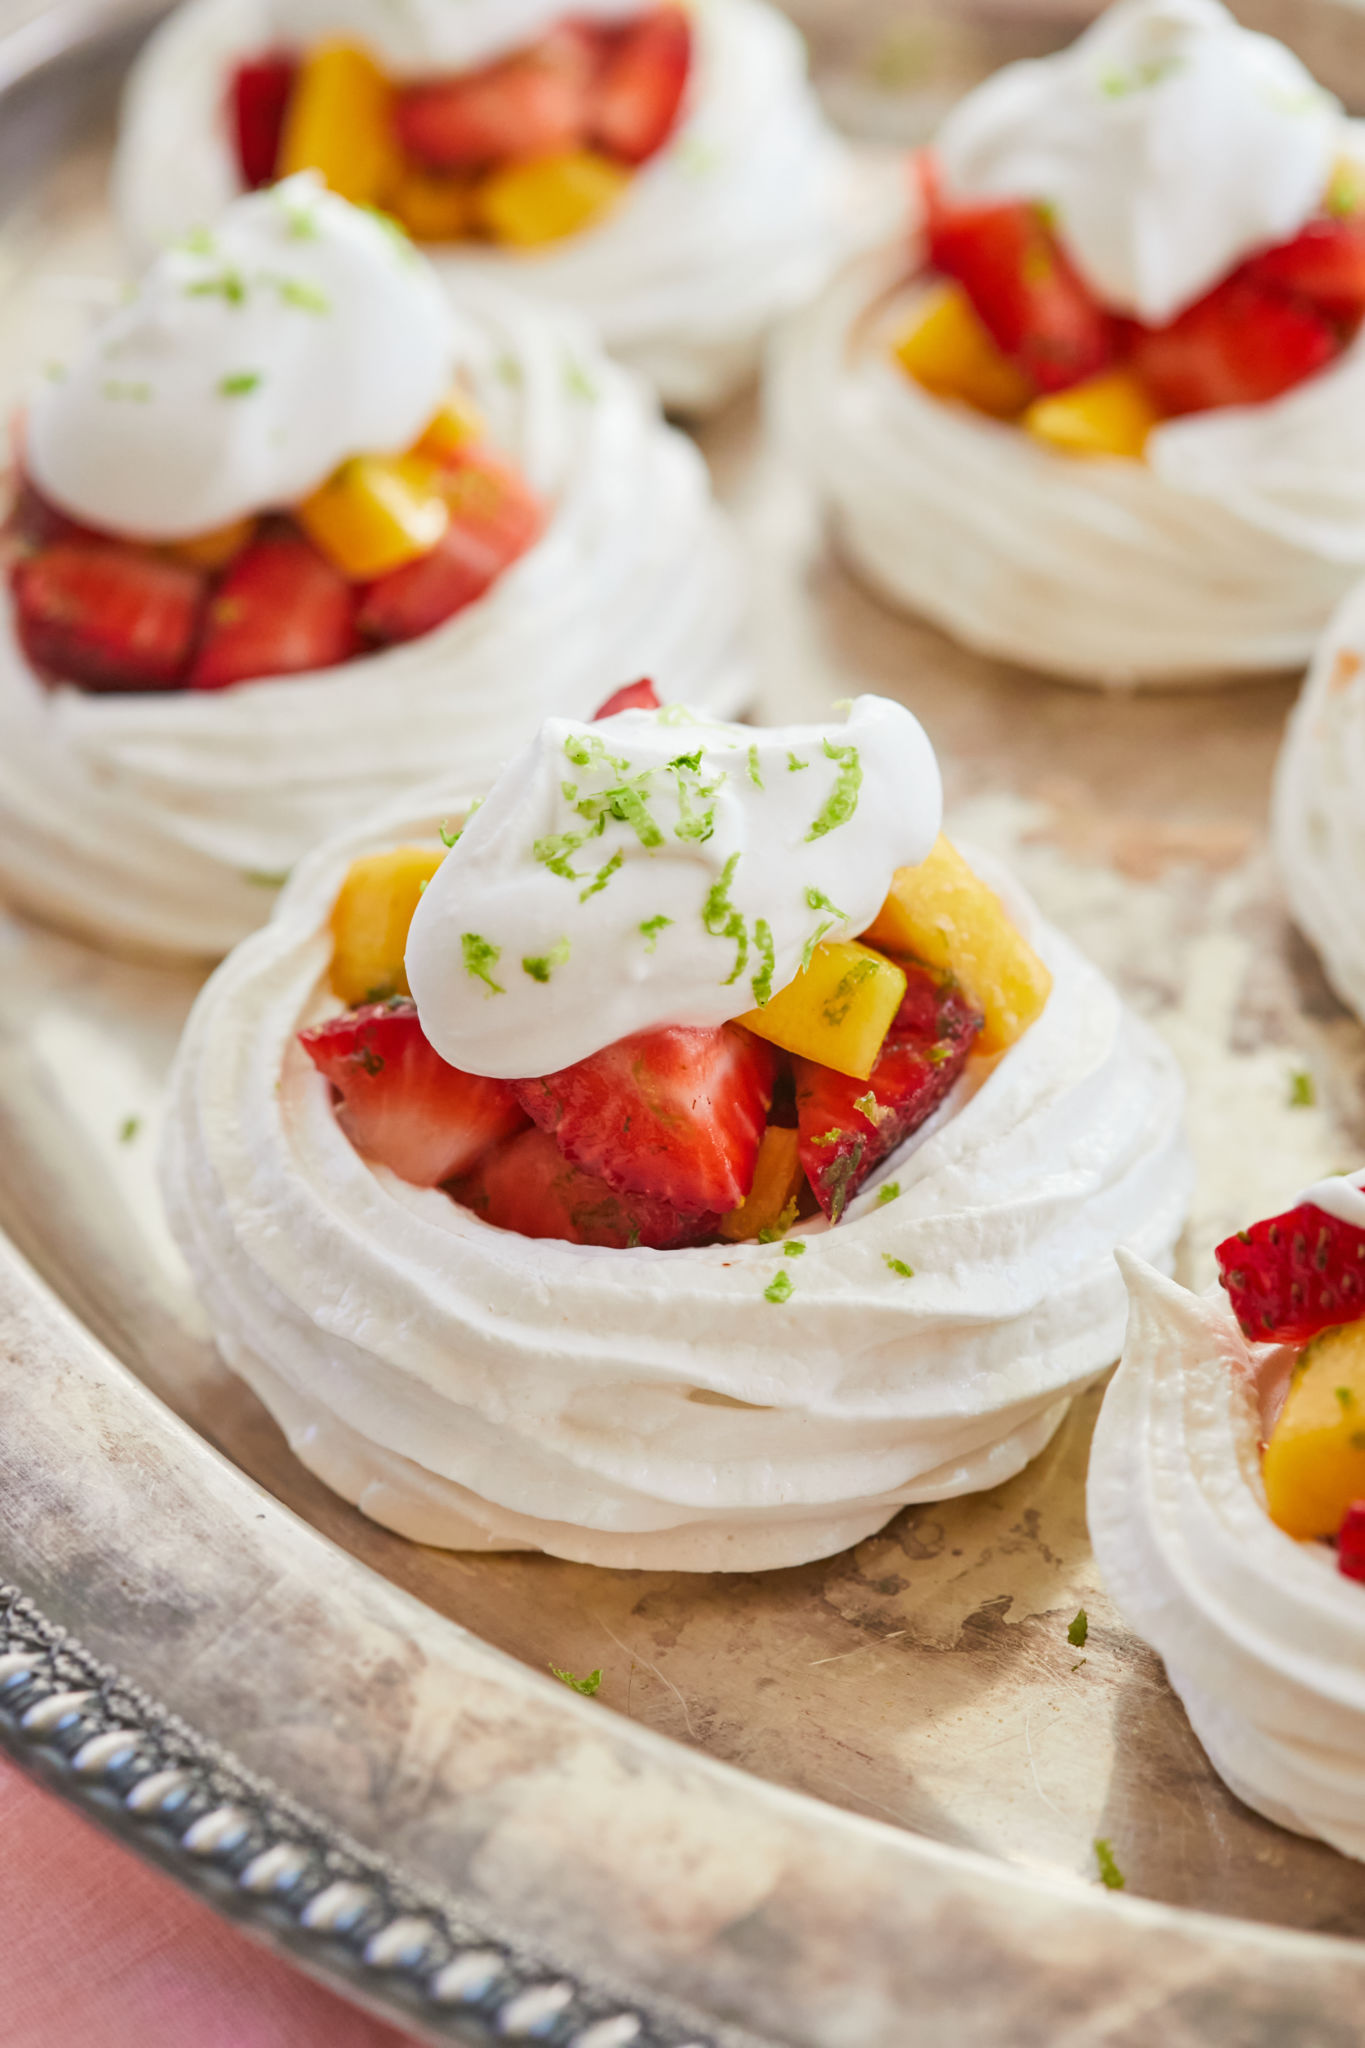 Stunning, heavenly meringue nests are placed on a silver platter. They are white layers of crispy billowy meringue loaded with irresistible tropical red strawberries and vibrant yellow mangoes, and adorned with velvety coconut cream, and green refreshing lime zest. 